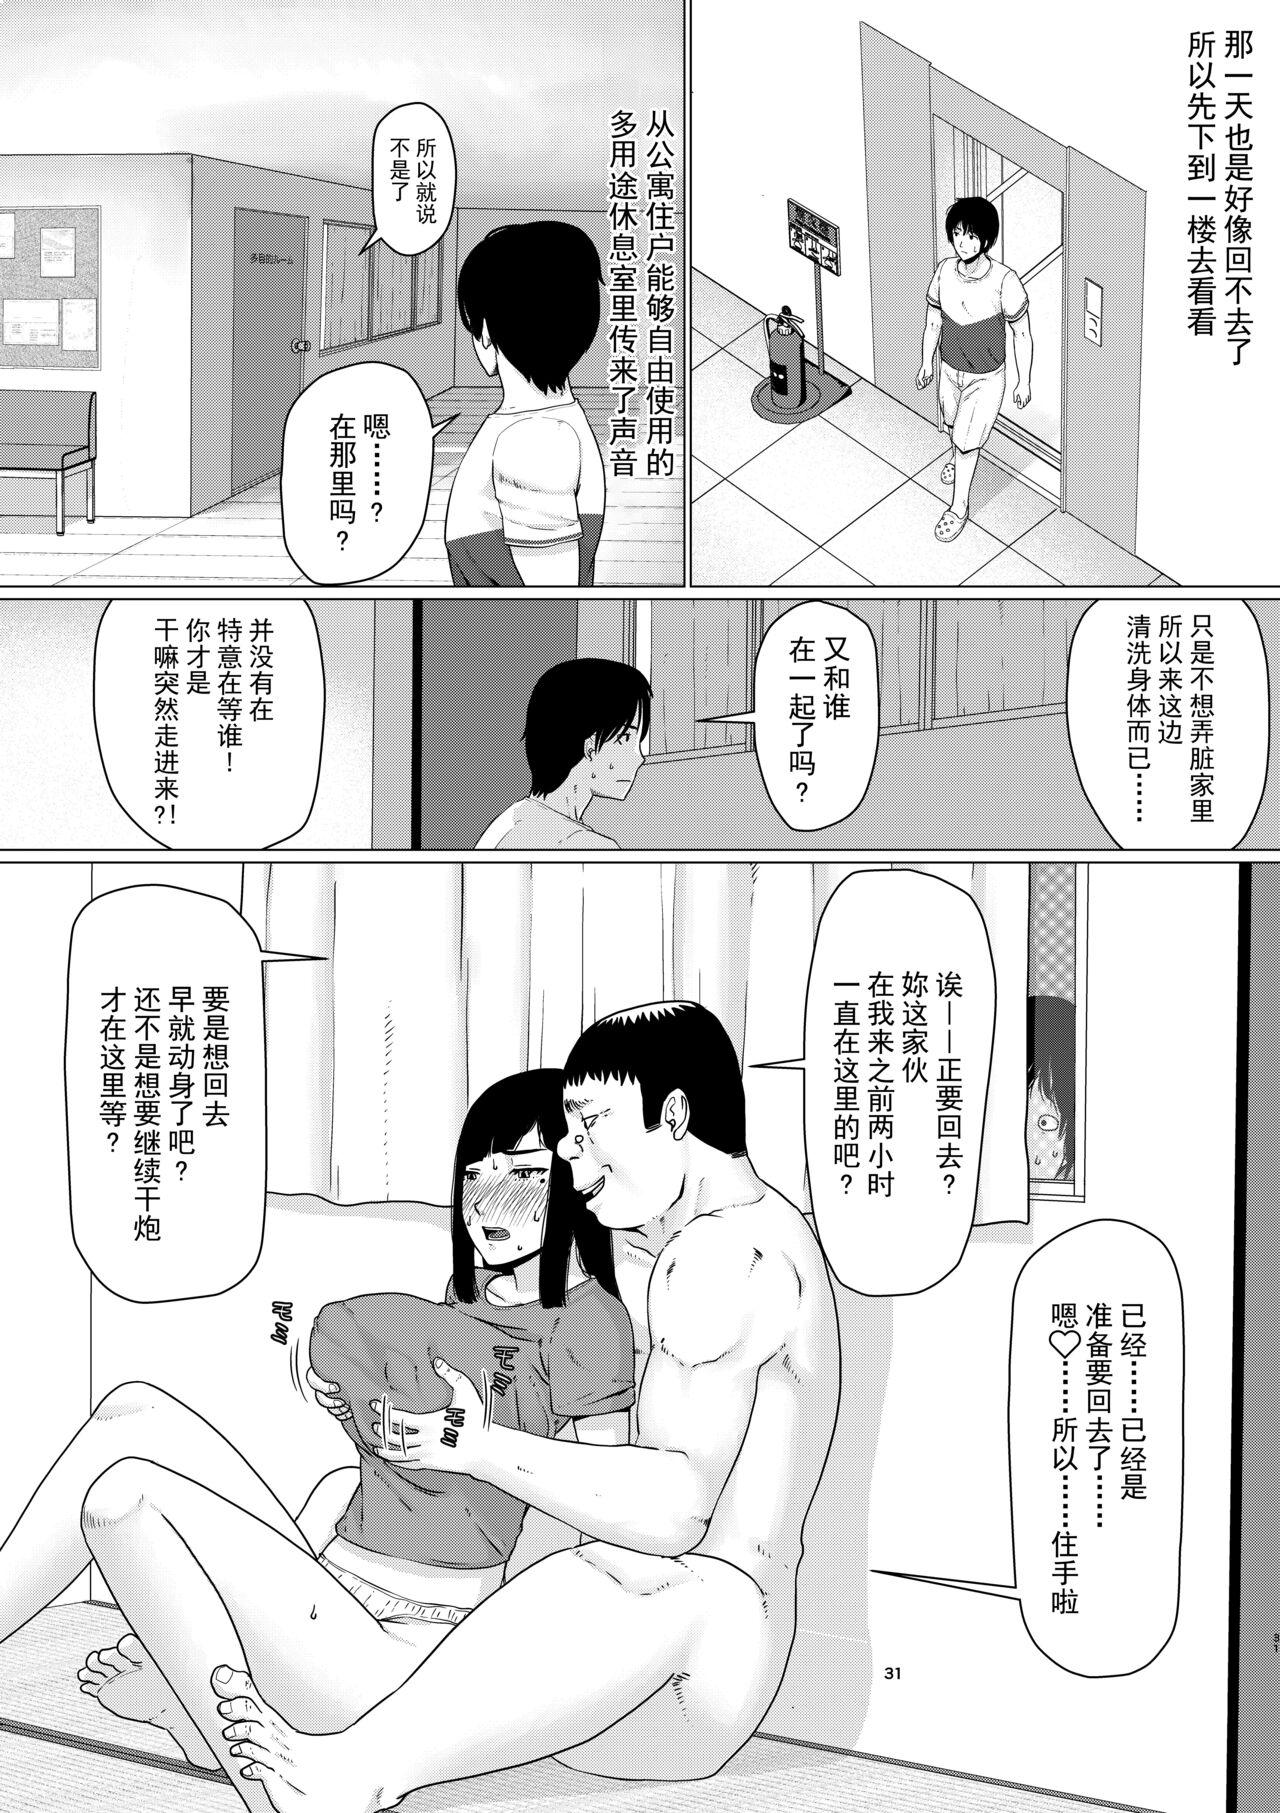 (Dōjinshi) Chieri can't lose!3 -Perverted toilet wife who fertilizes anyone's sperm with her husband's approval- Volume 1 (Original) [Chinese][超勇漢化組] 32